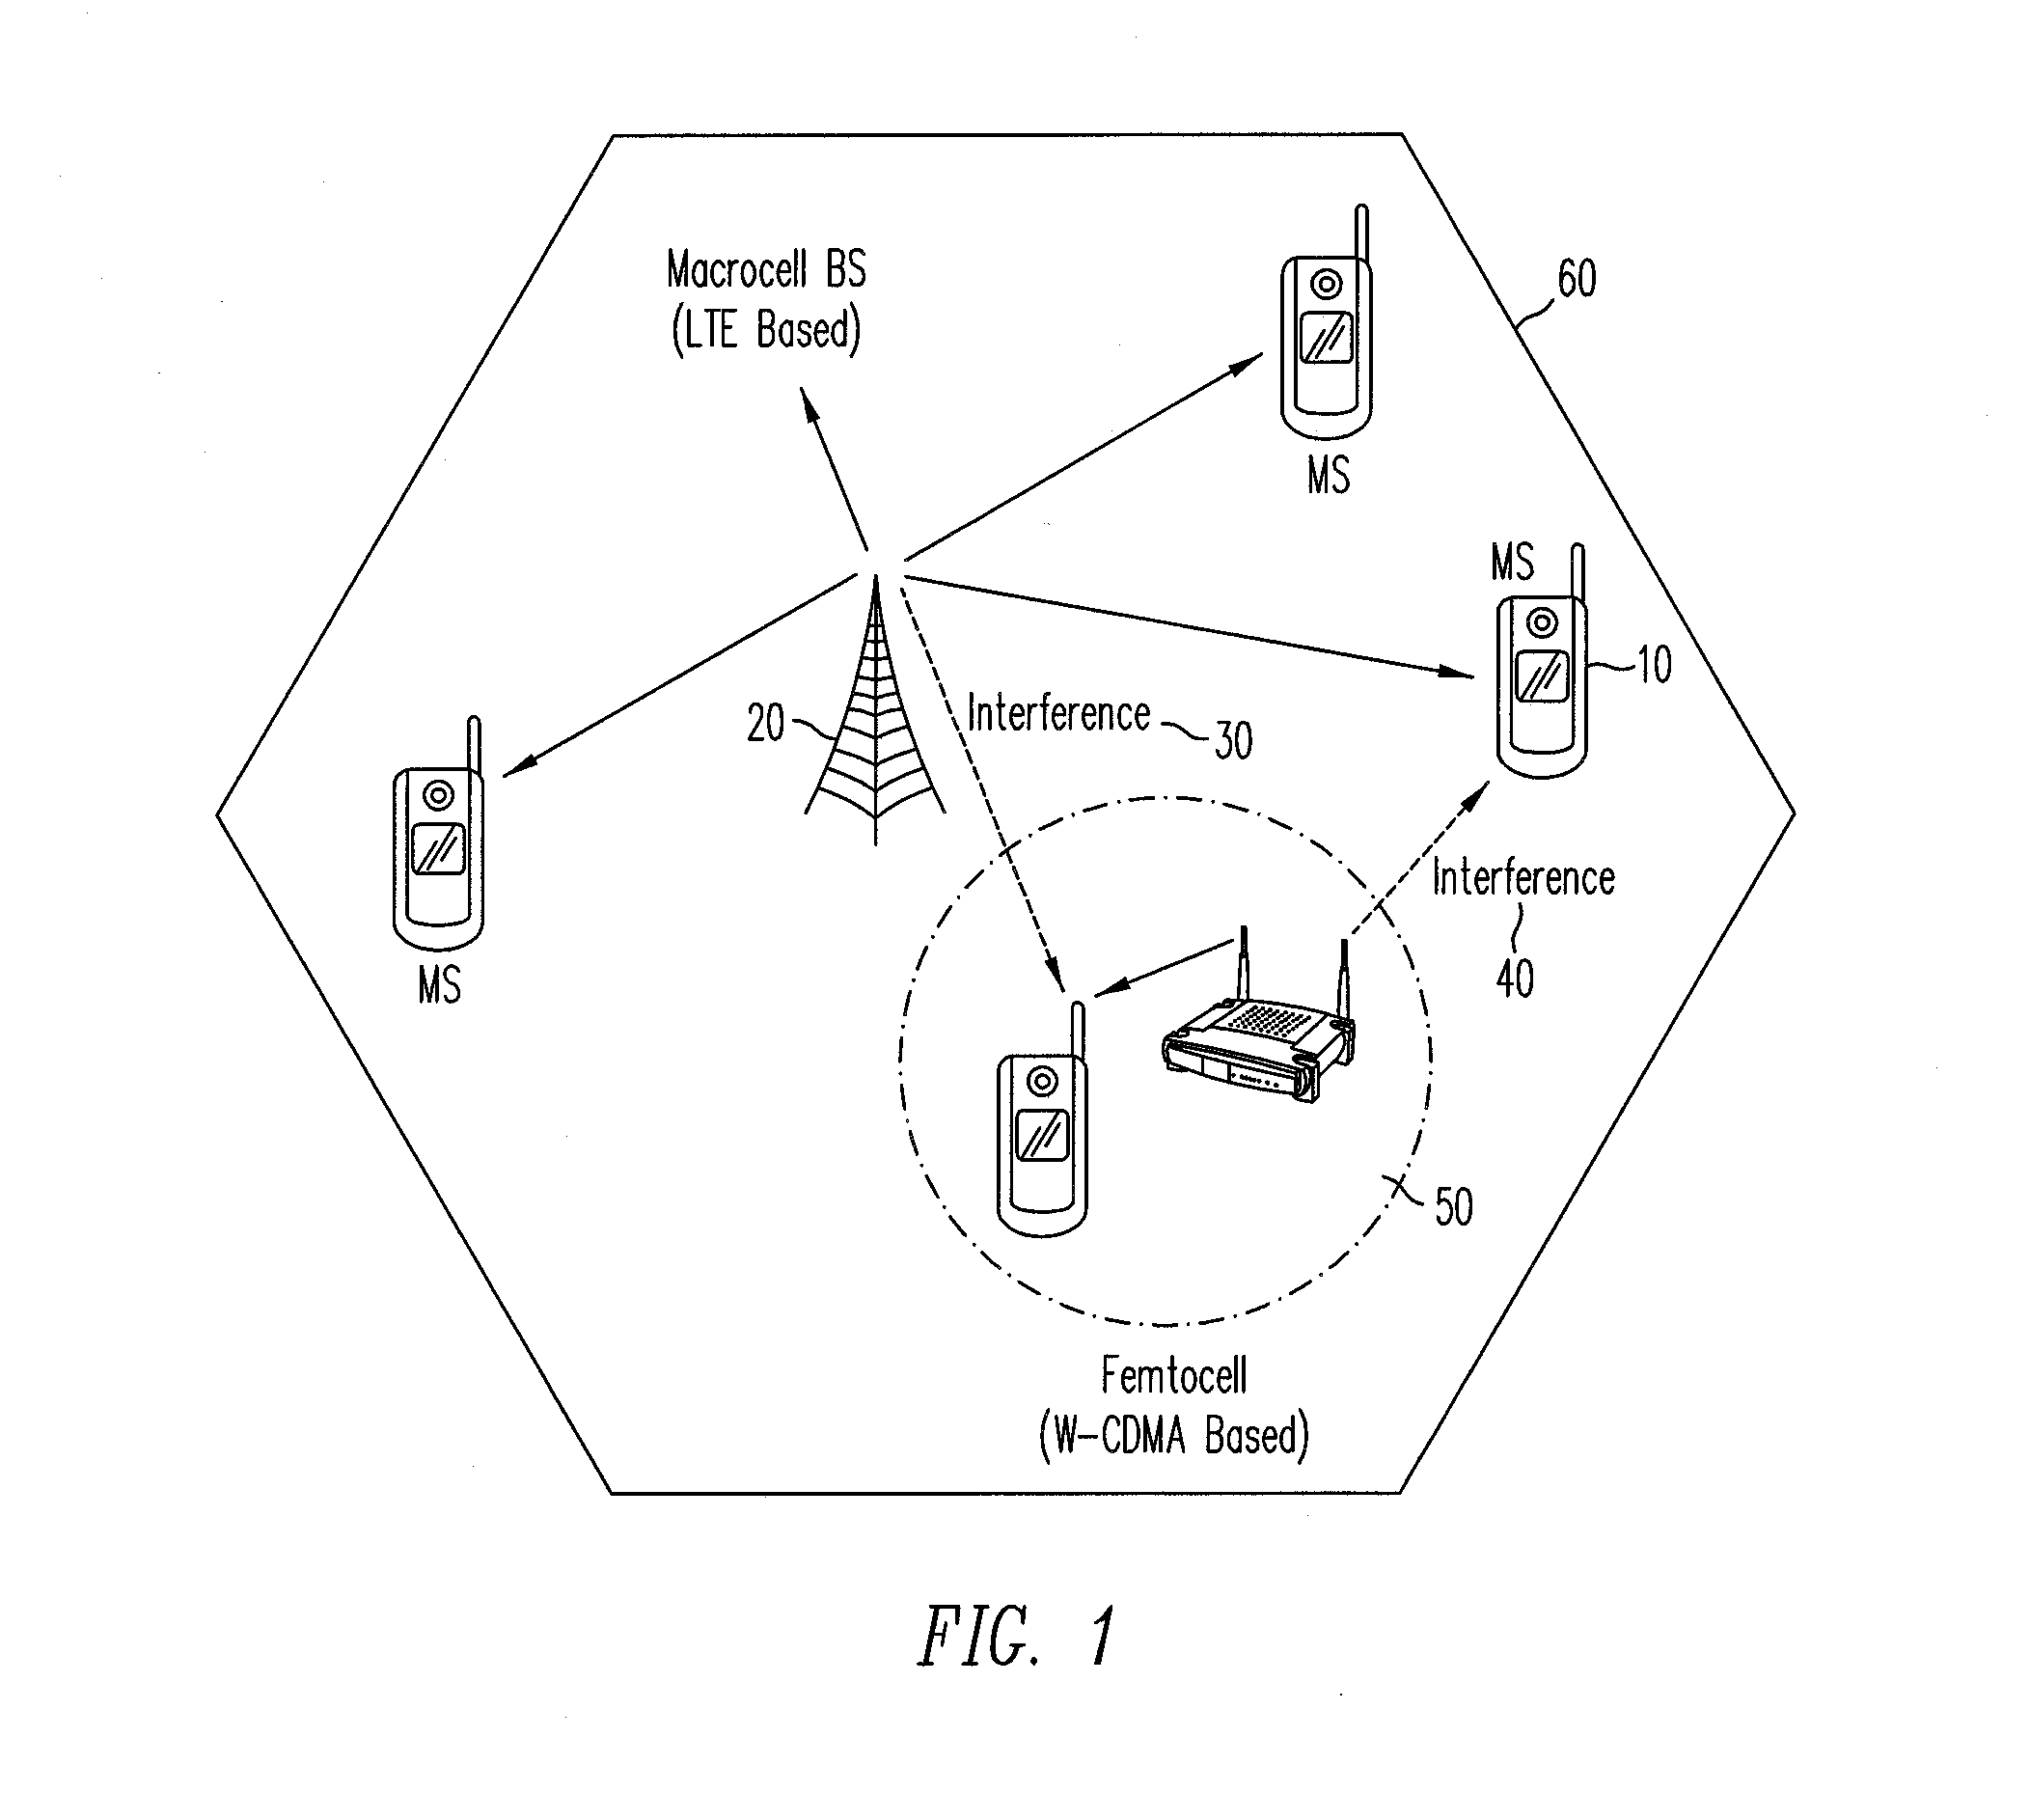 Method for iterative interference cancellation for co-channel multi-carrier and narrowband systems